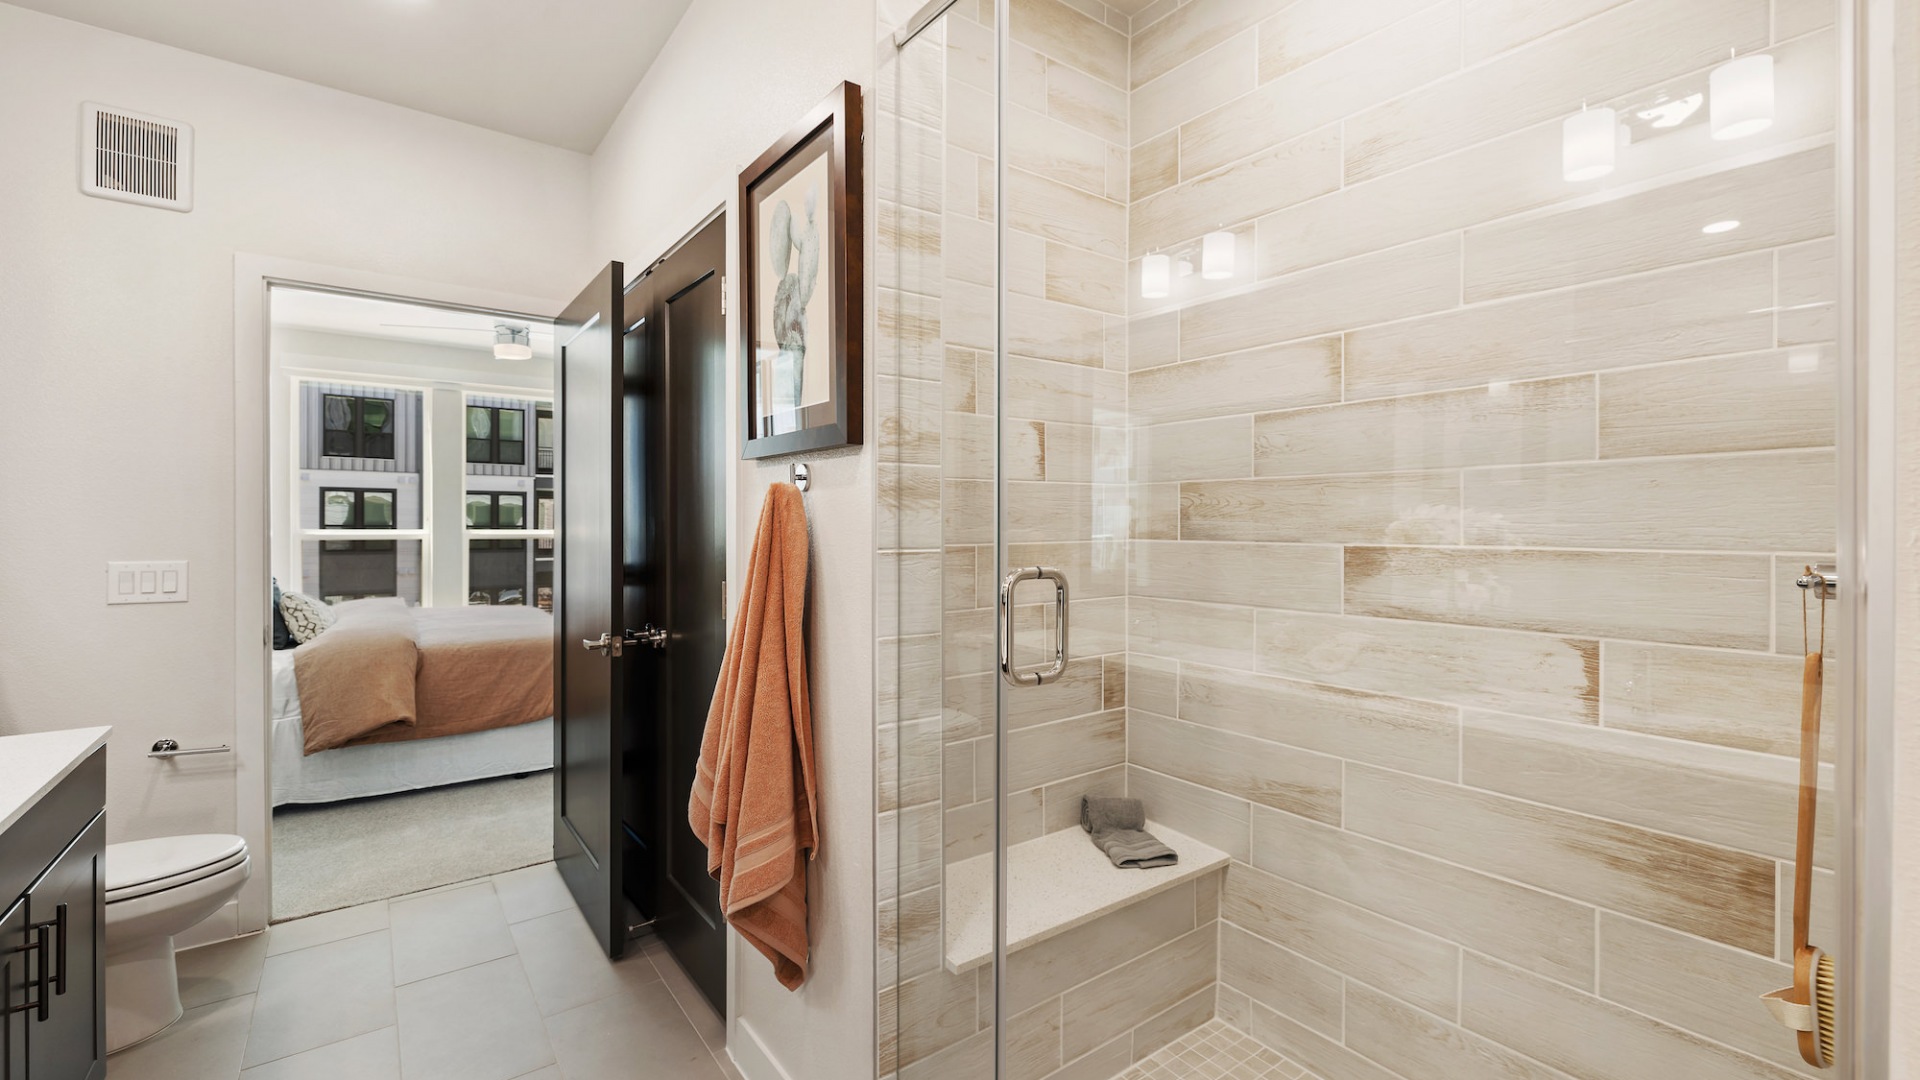 Model bathroom at our apartments in Houston, featuring a tiled shower with a glass door and a view of the bedroom.